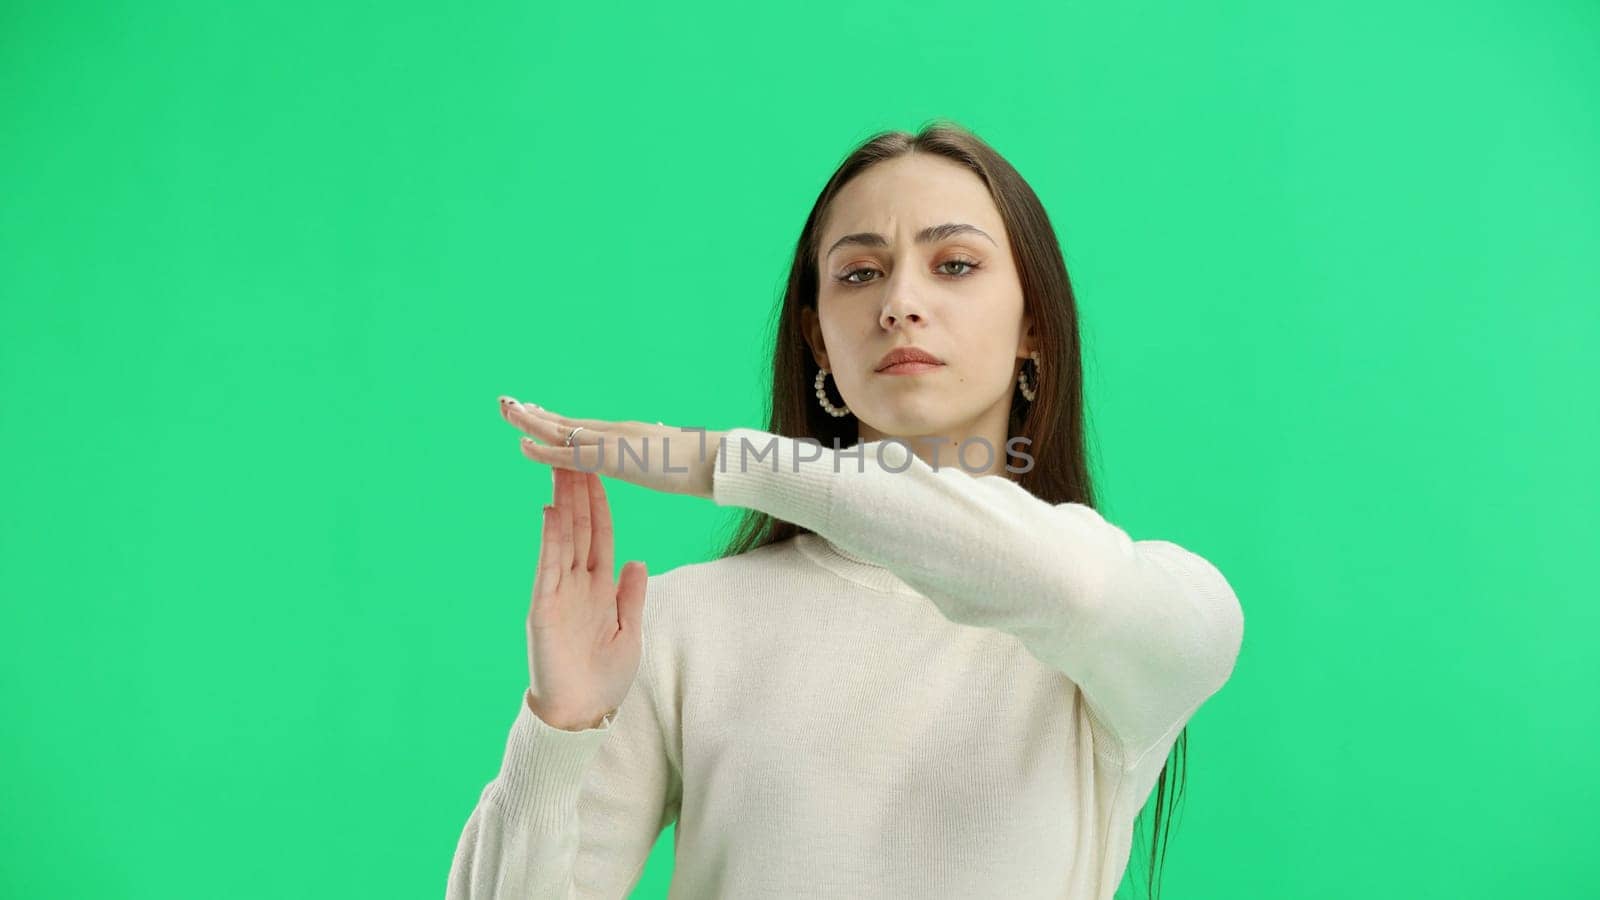 Woman, close-up, on a green background, showing a pause sign.